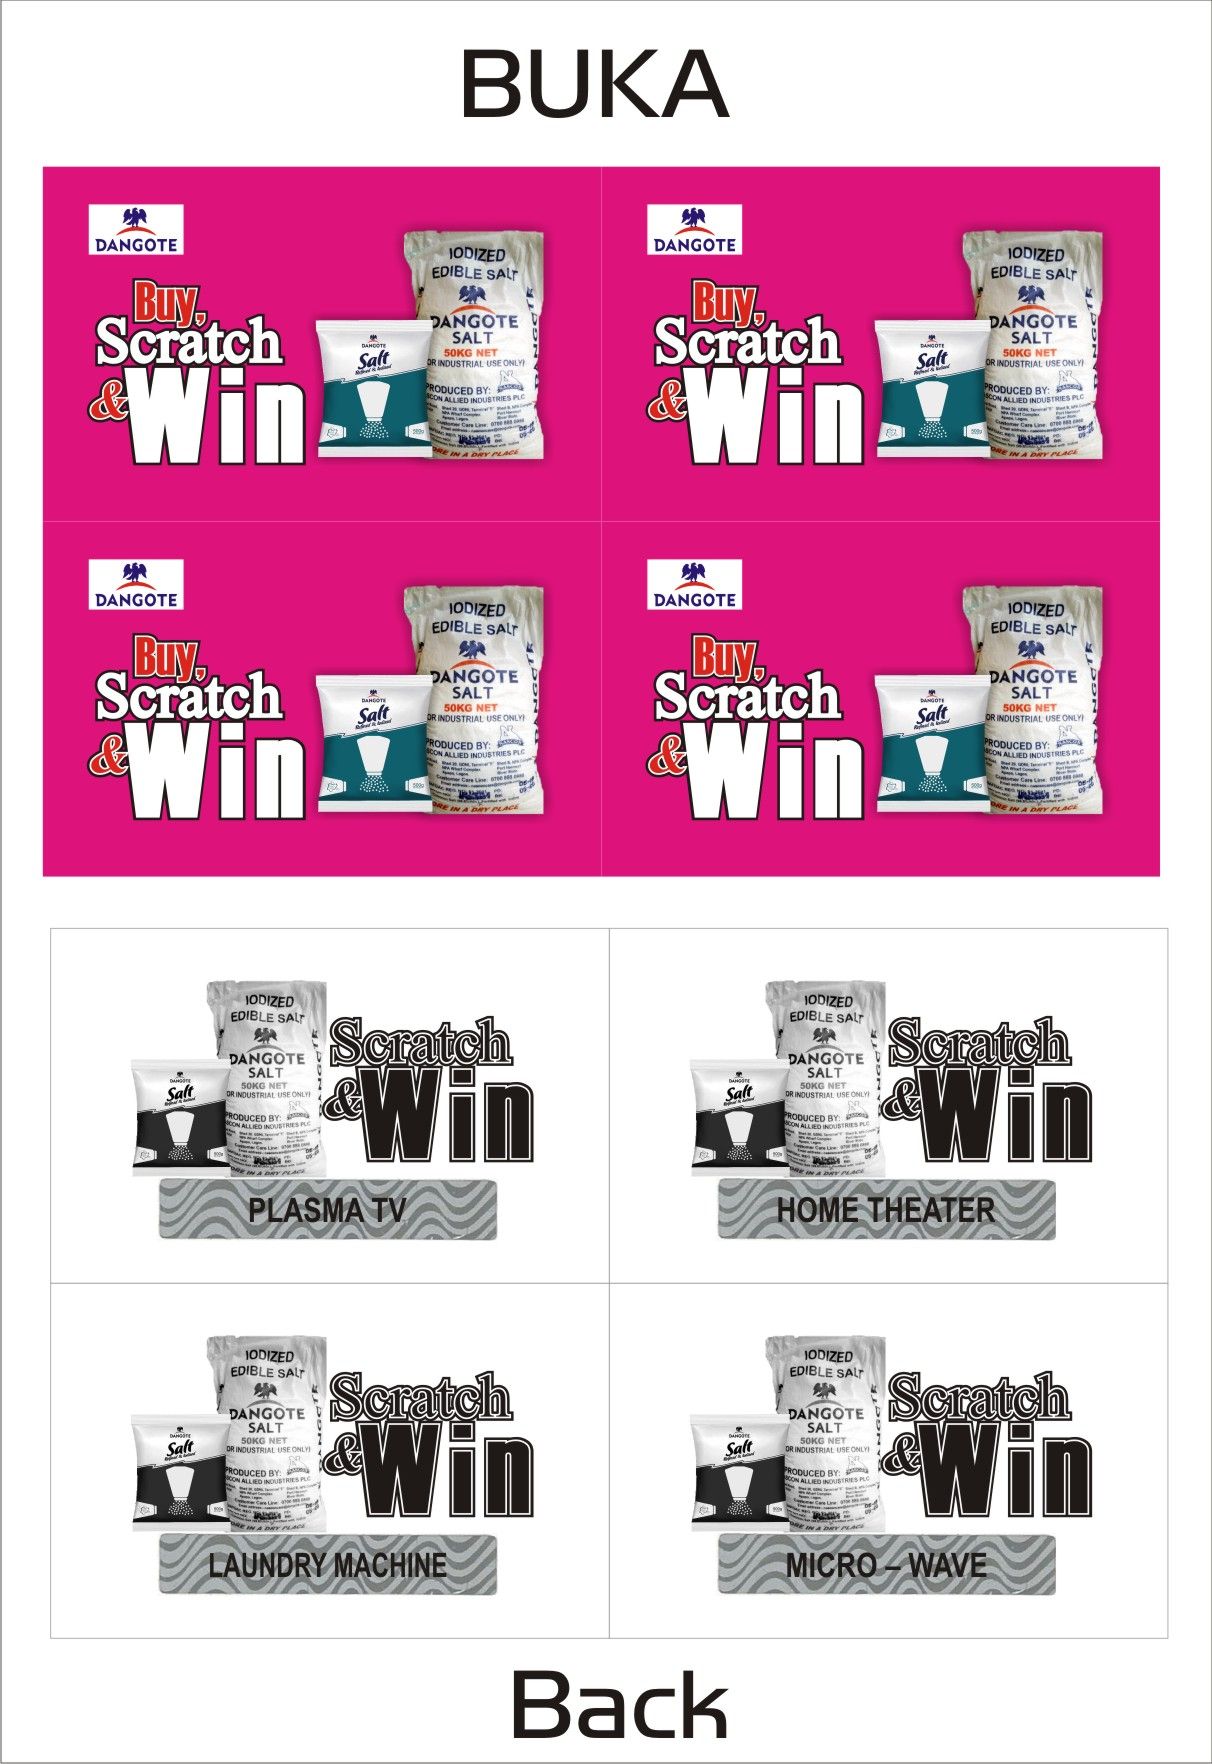 CALL CHINEDU ON 09022536974 TO PRINT SCRATCH AND WIN PROMO CARDS, PORTAL ACCESS CARDS, LOTTERY CARDS, ETC